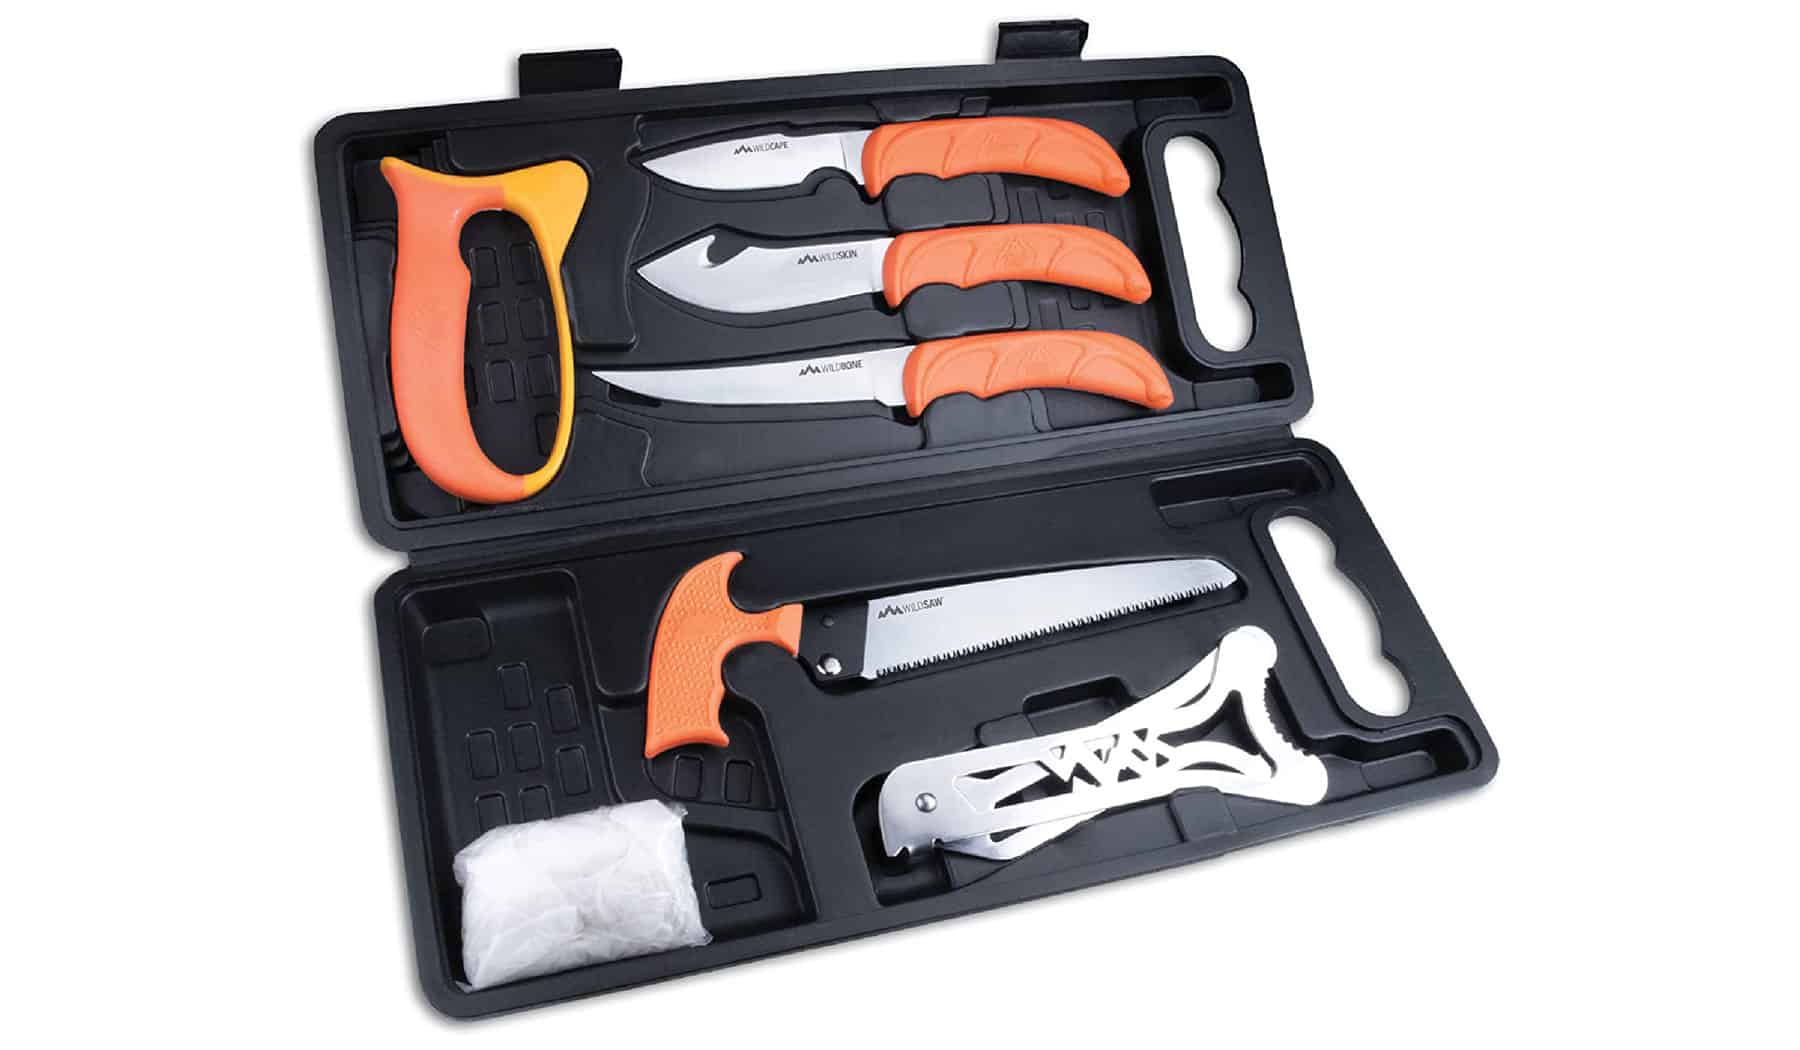 Outdoor Edge has been a popular budget knife brand for years. This field dressing kit offers a decent value for anyone trying to get a decent kit at a good price.